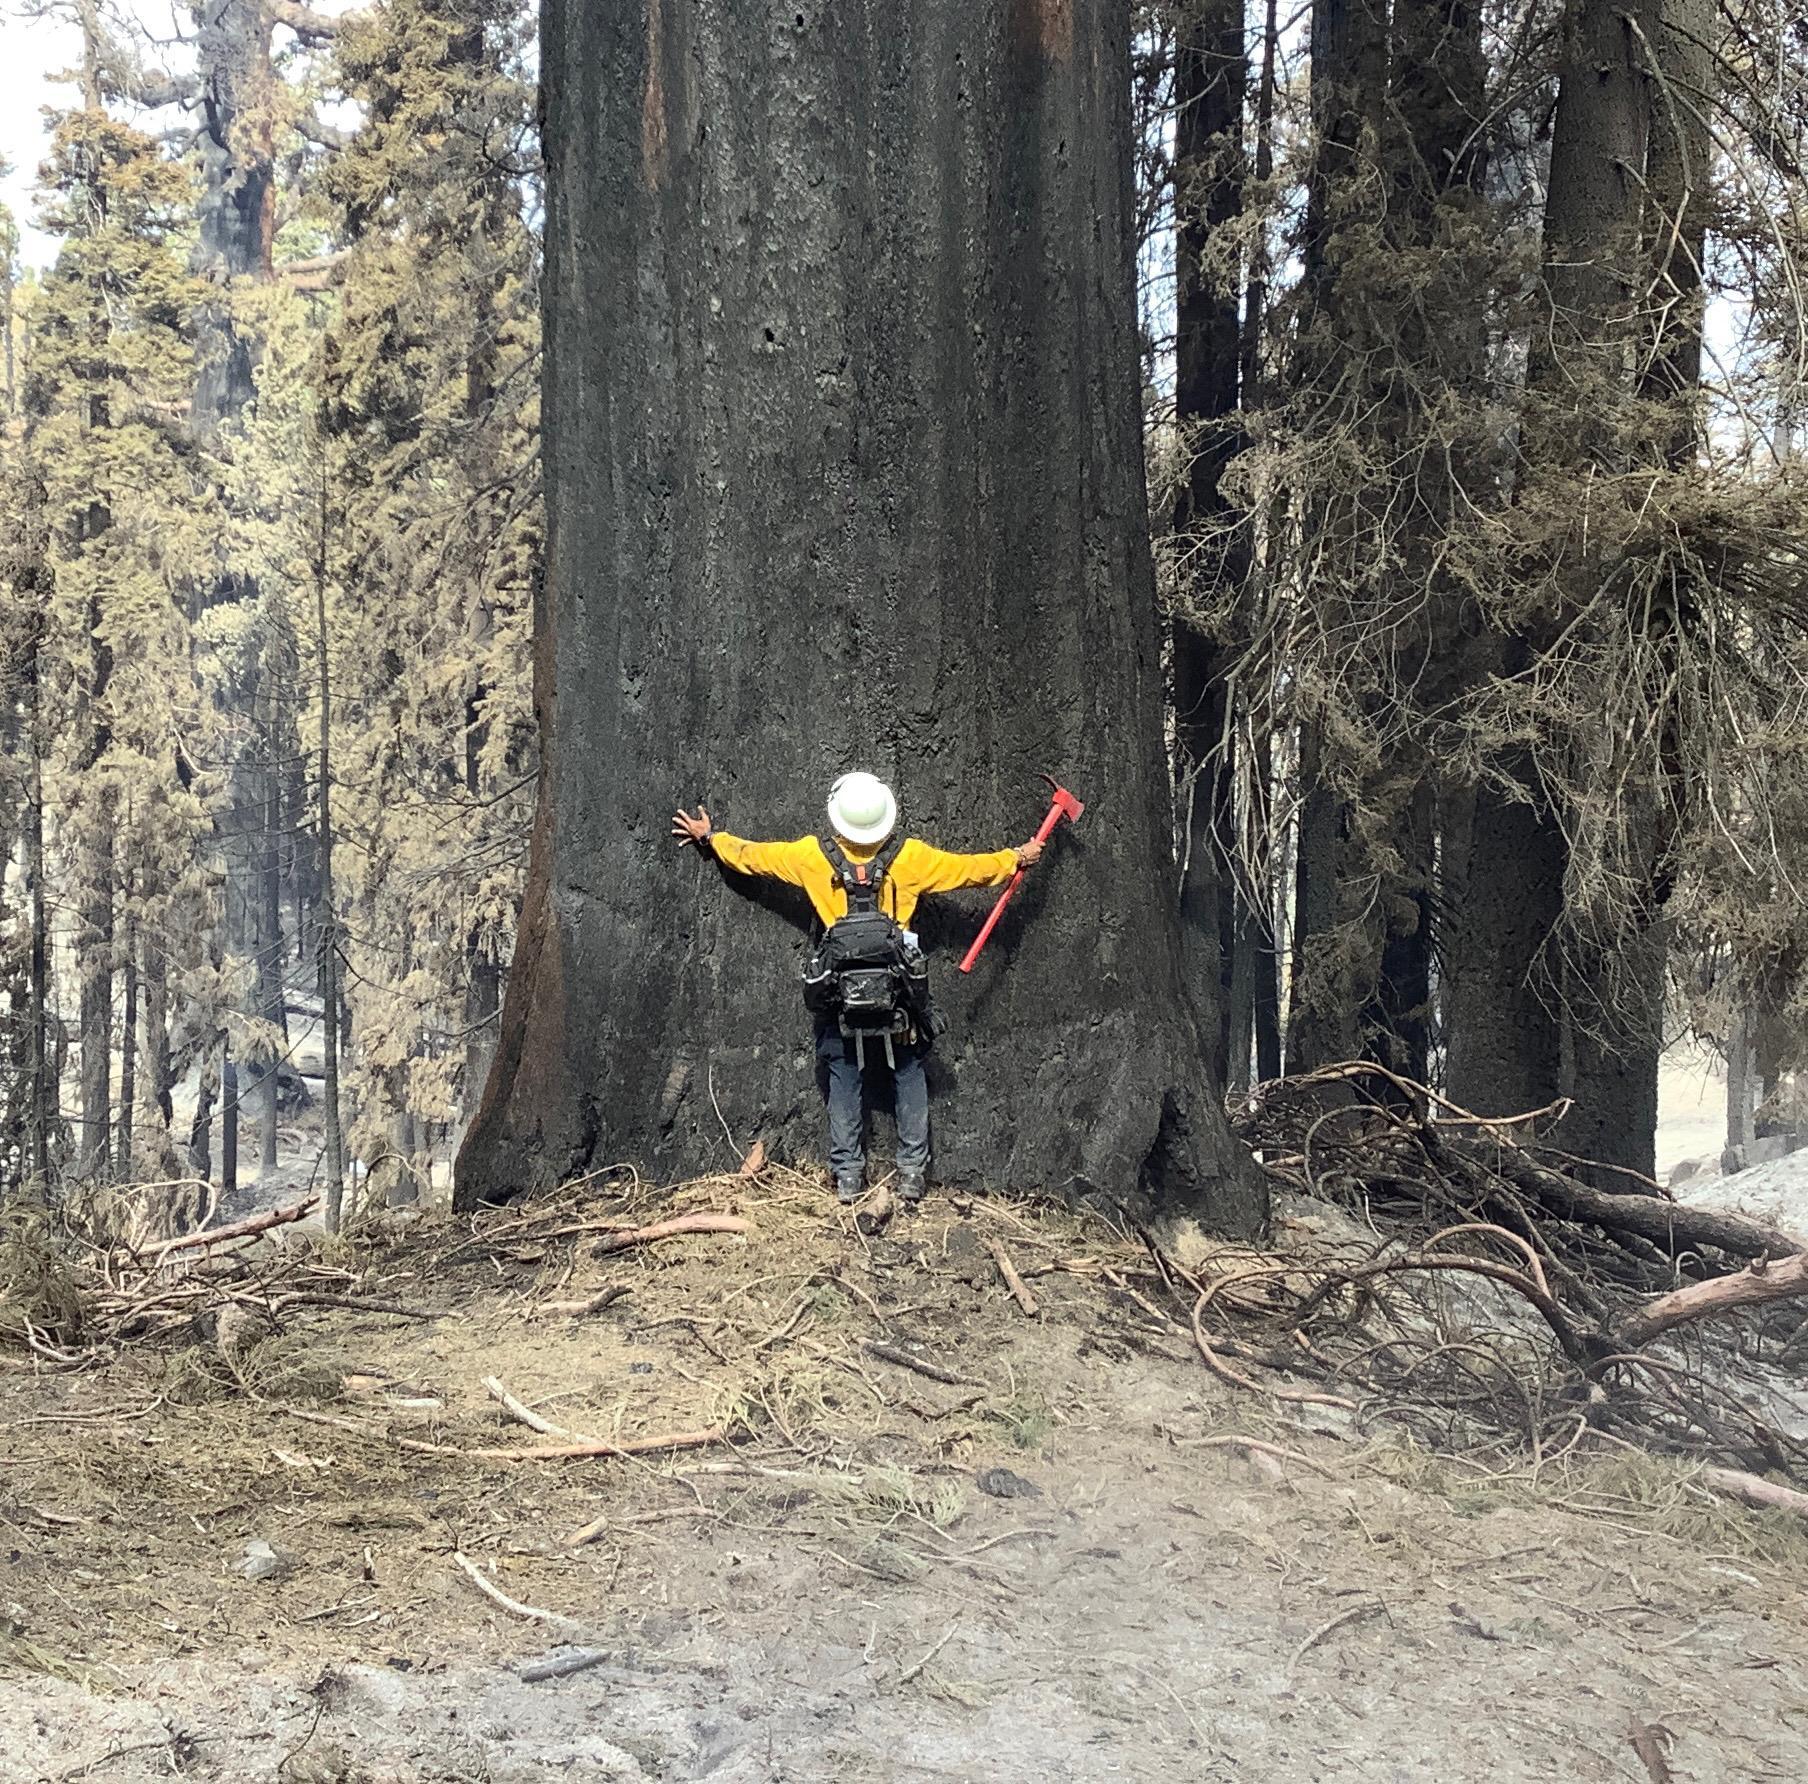 A wildland firefighter standing at the base of a large, burnt sequoia tree with arms extended.and looking up.